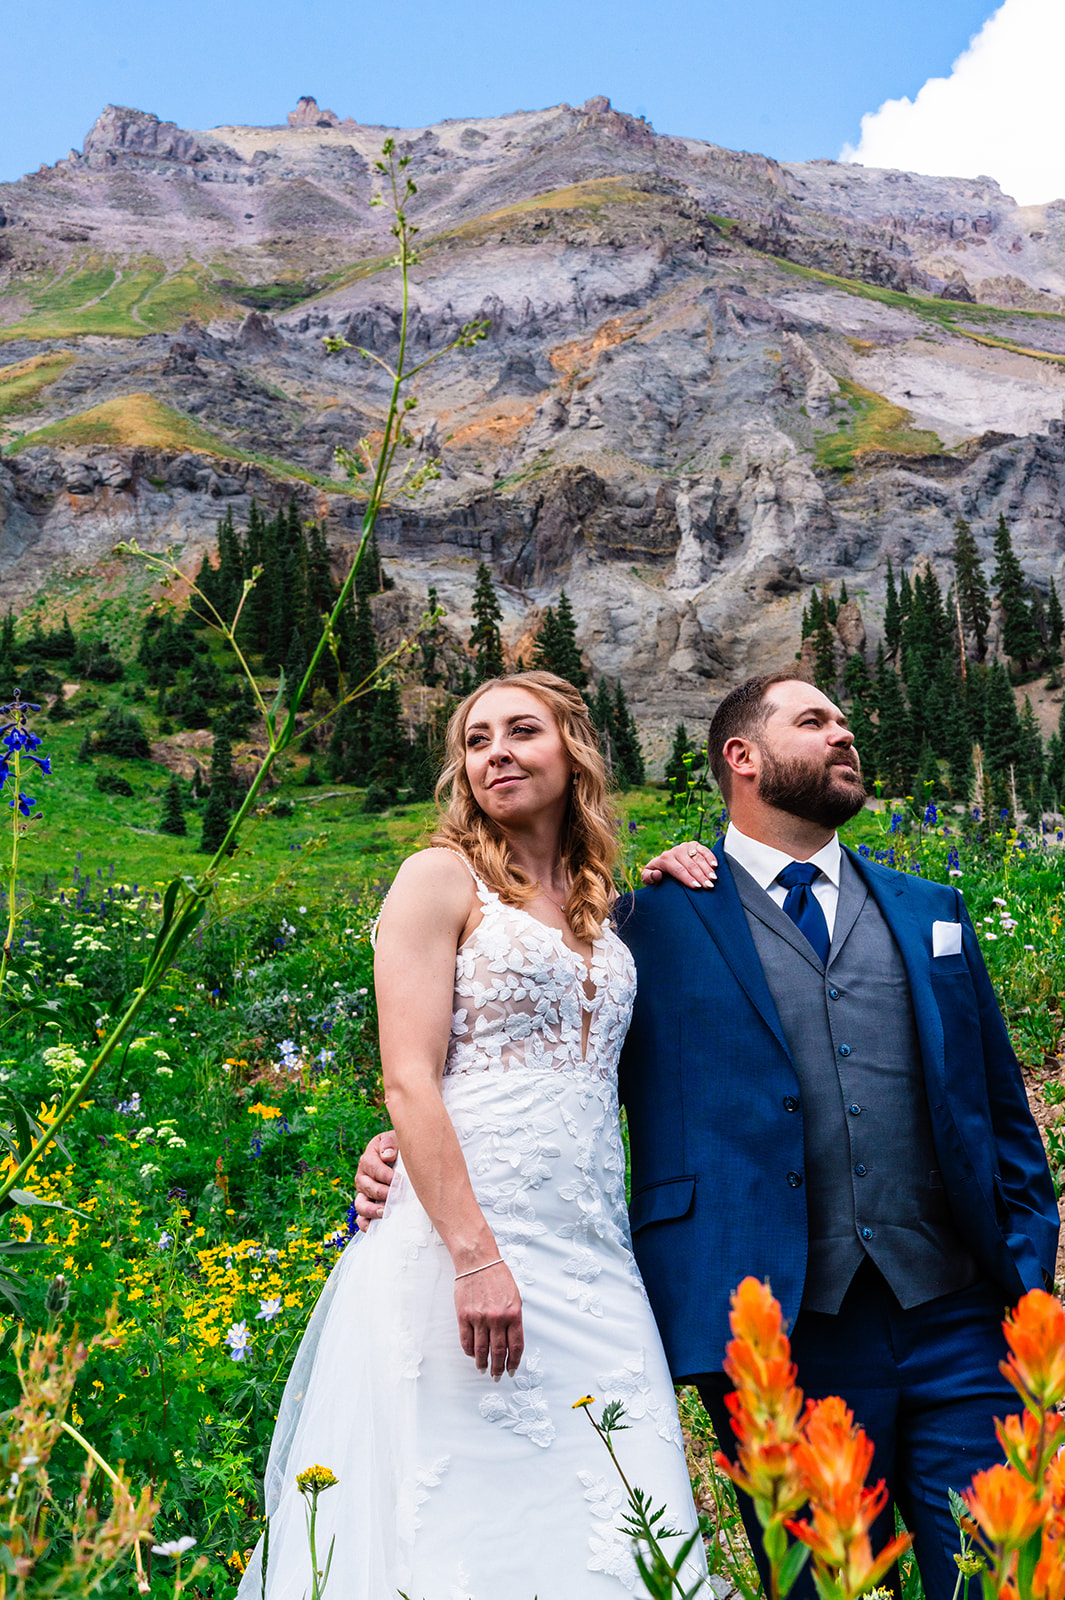 Bride and groom posing in a field of flowers and grass at Yankee Boy Basin